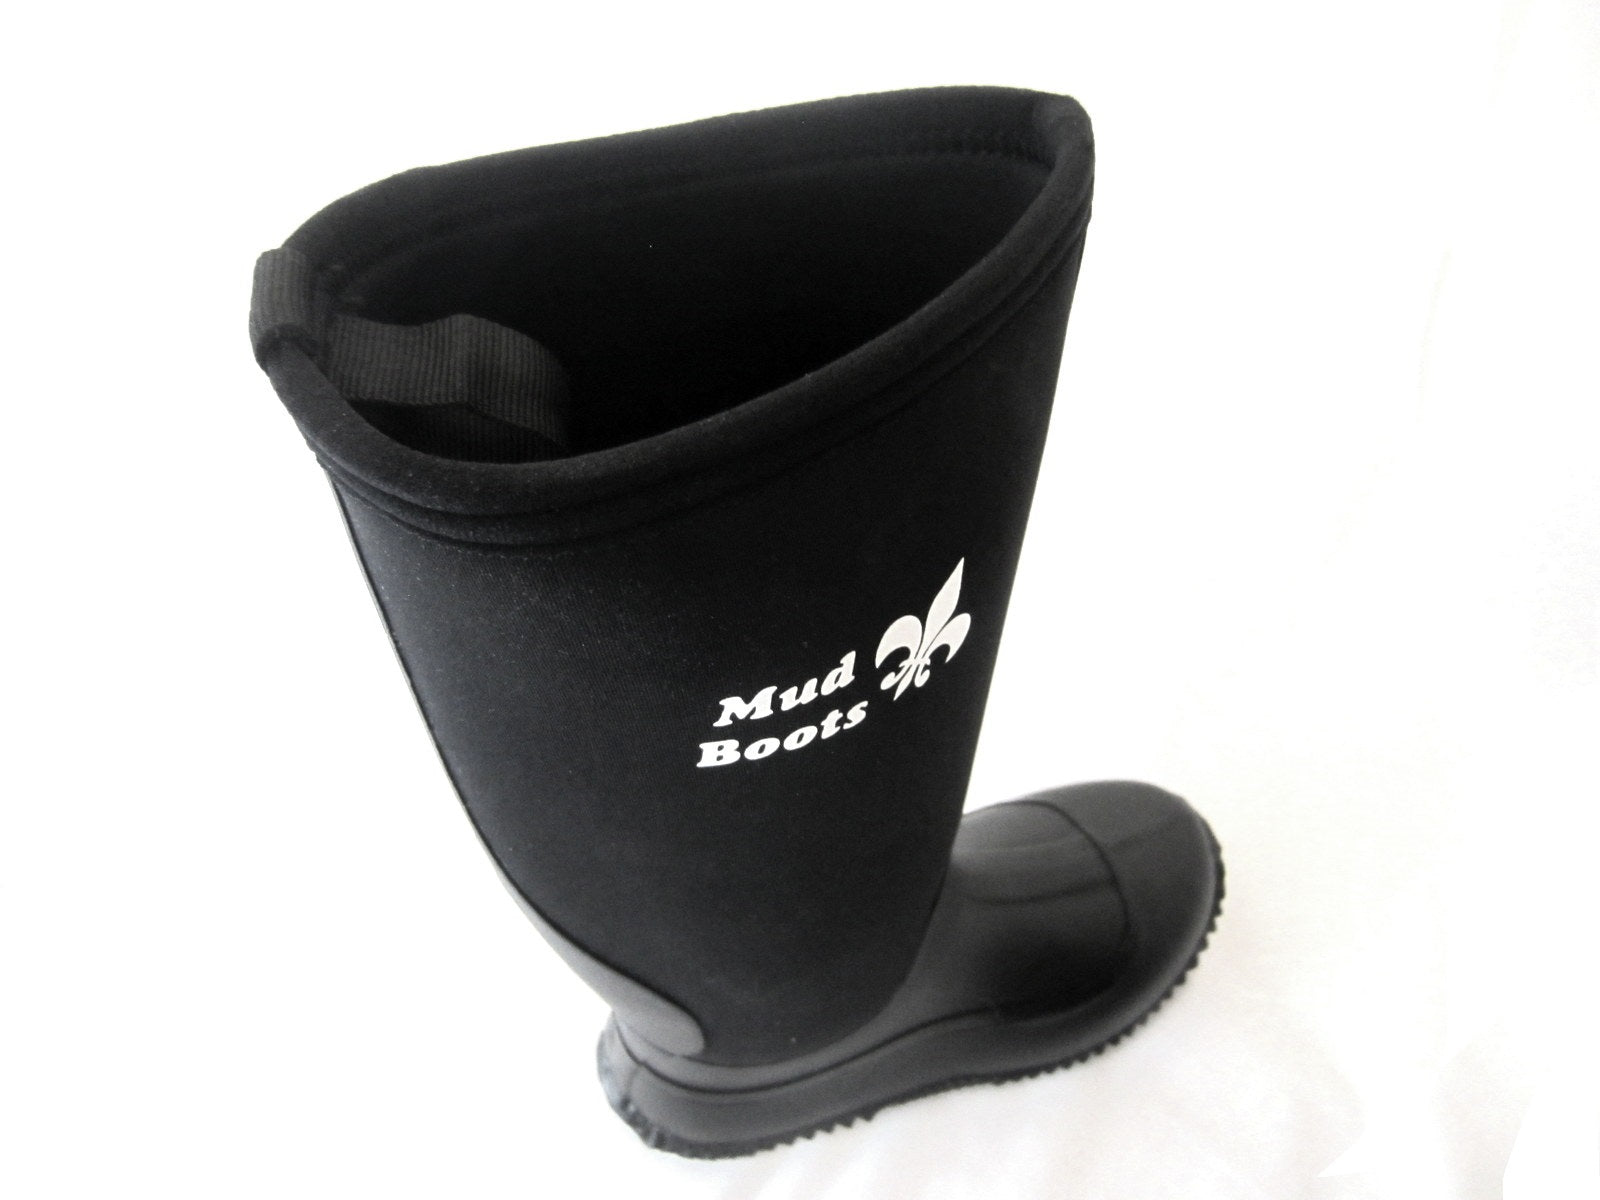 Mud Boot - neoprene boots, rubber boots, knee high